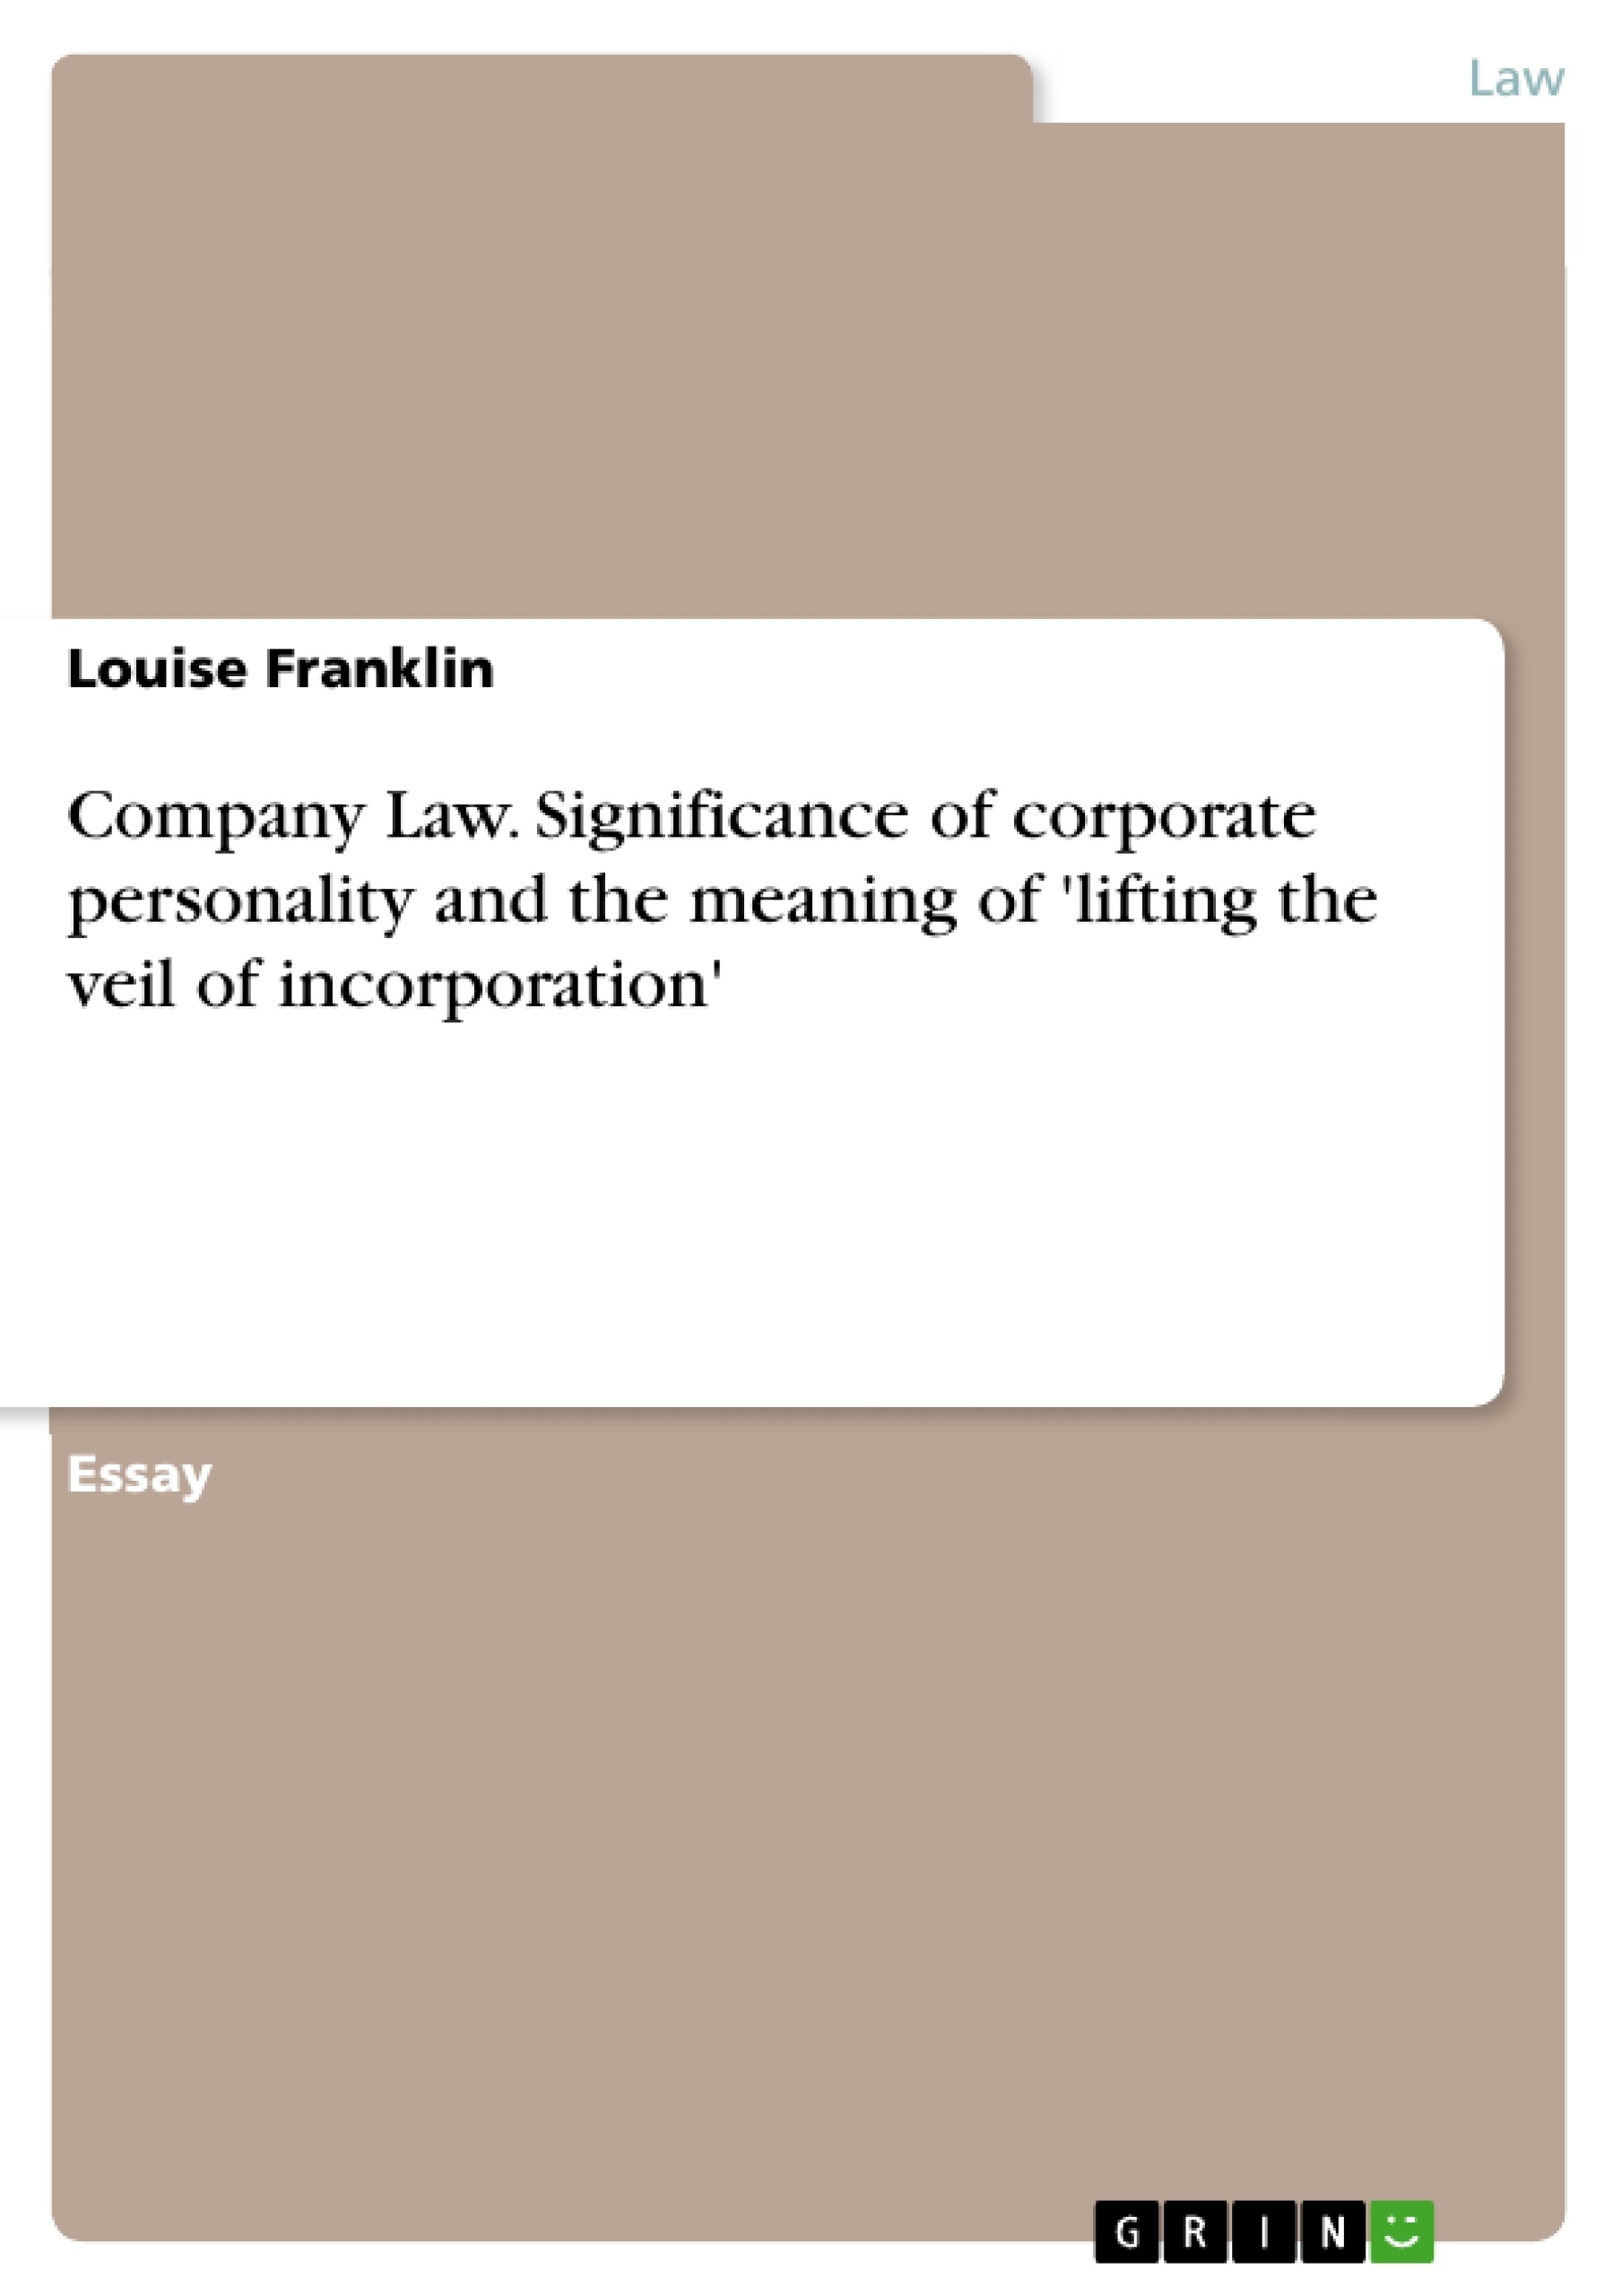 Title: Company Law. Significance of corporate personality and the meaning of 'lifting the veil of incorporation'